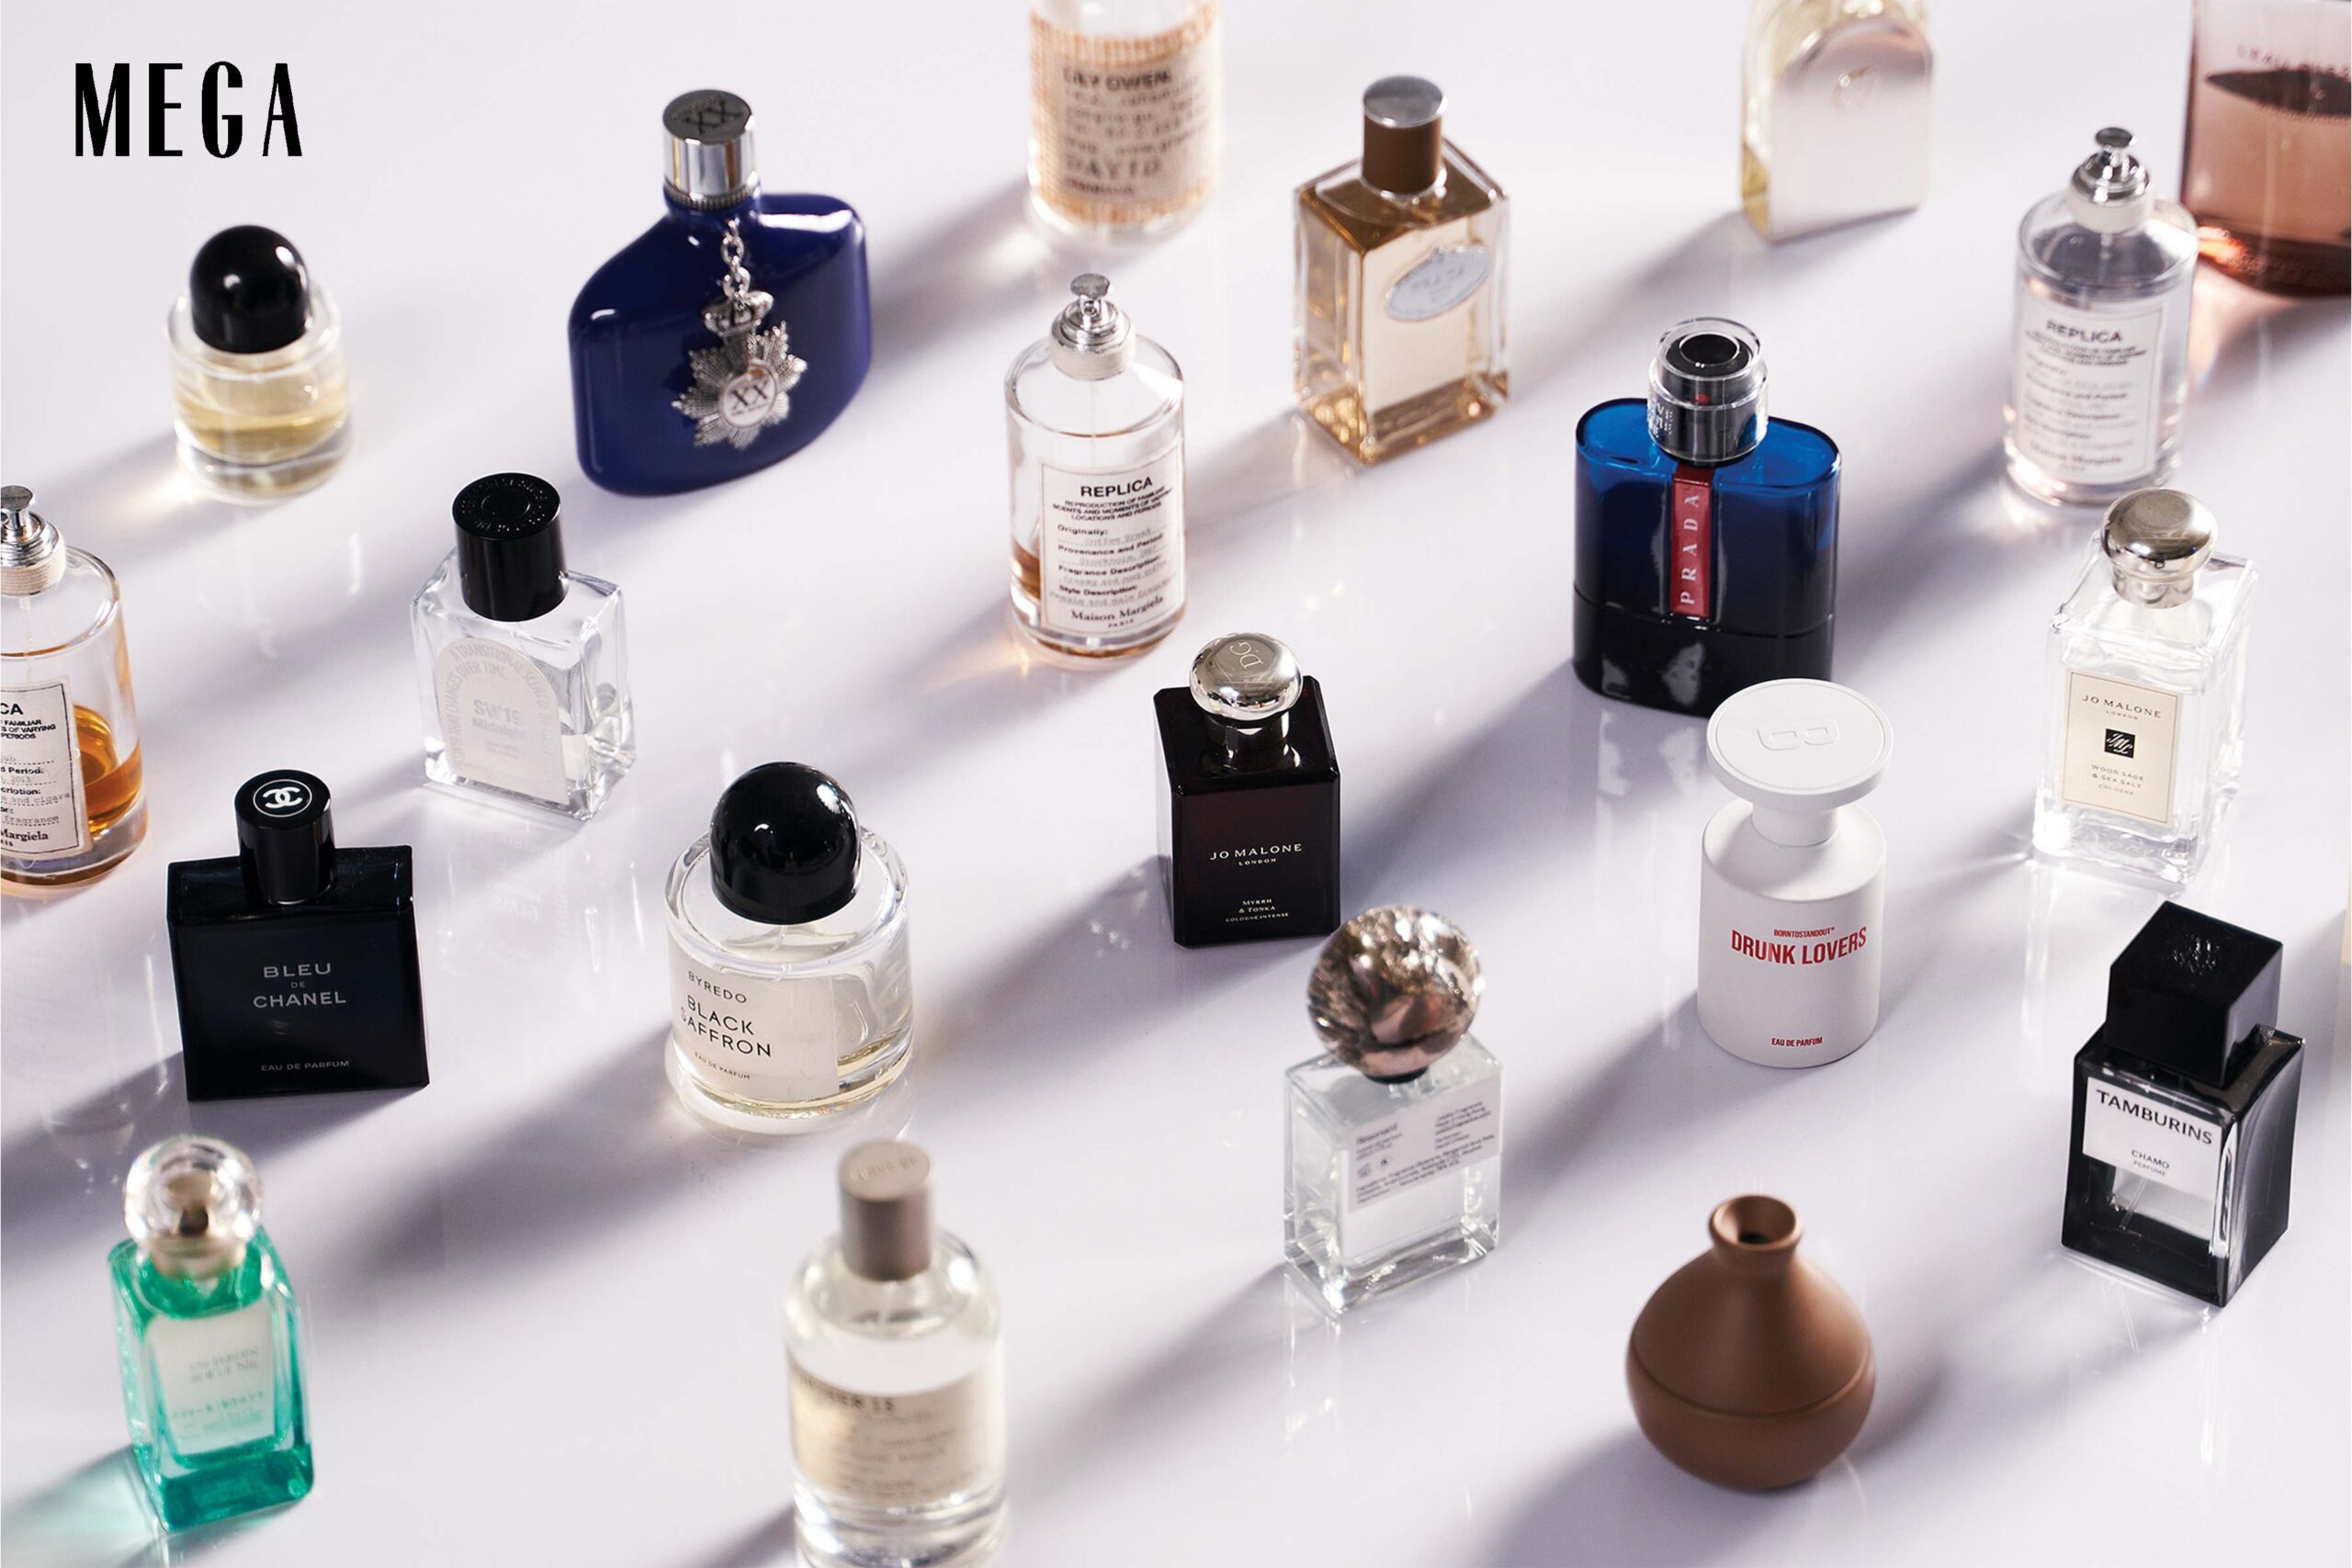 Guison's love for fragrances has expanded his collection that ranges from designer bottles to niche favorites 